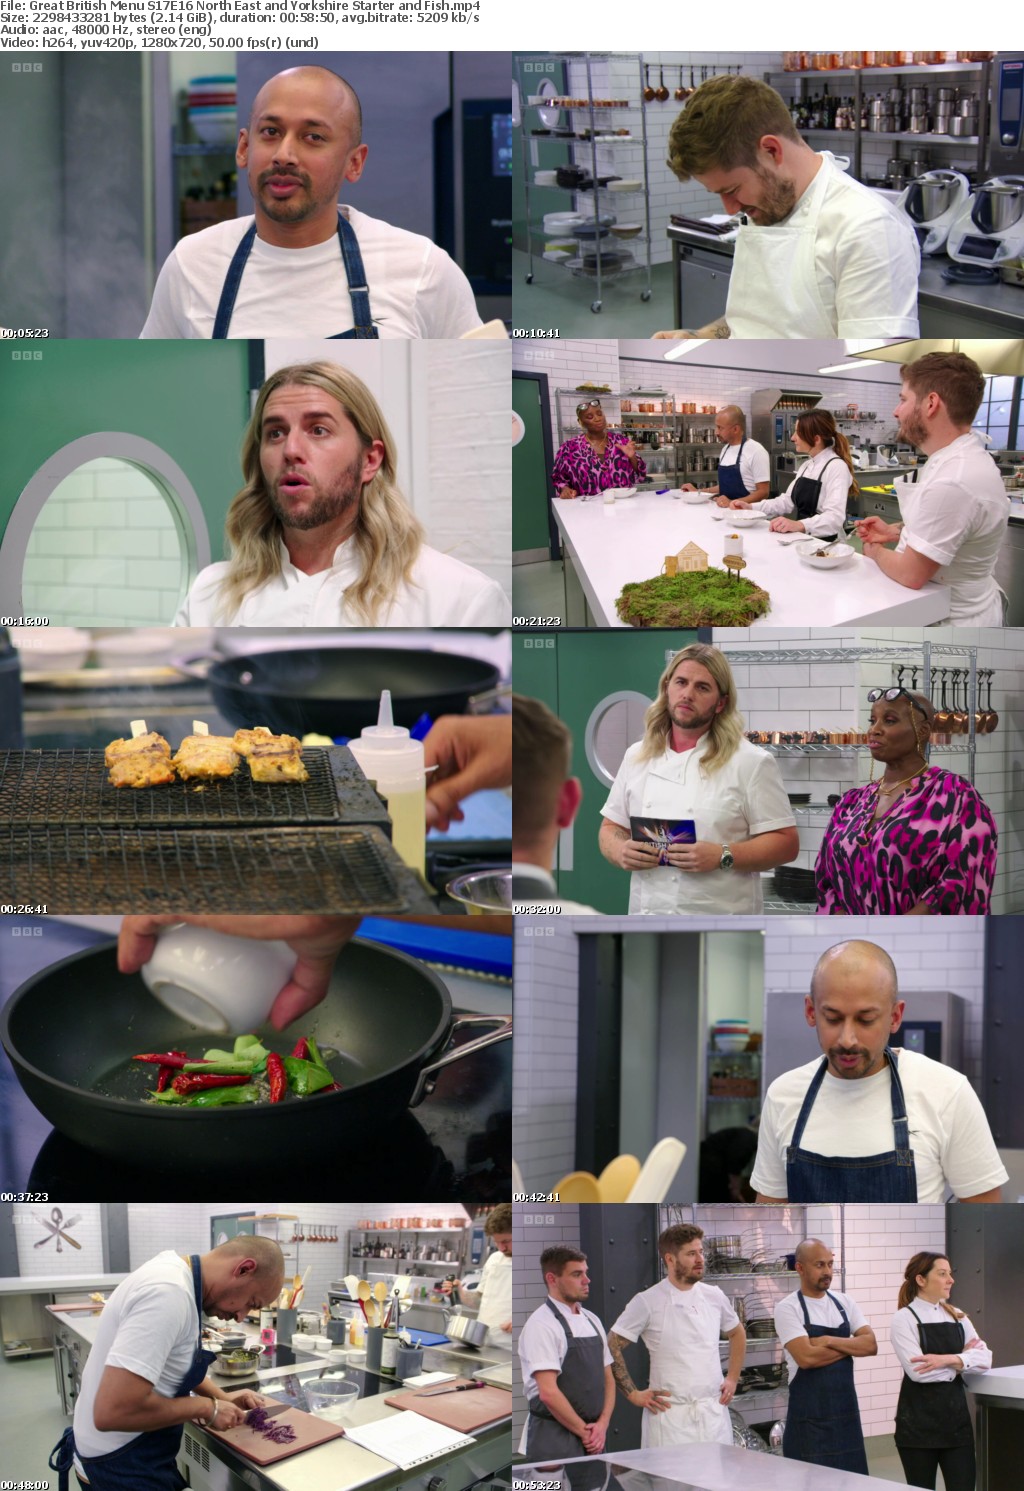 Great British Menu S17E16 North East and Yorkshire Starter and Fish (1280x720p HD, 50fps, soft Eng subs)